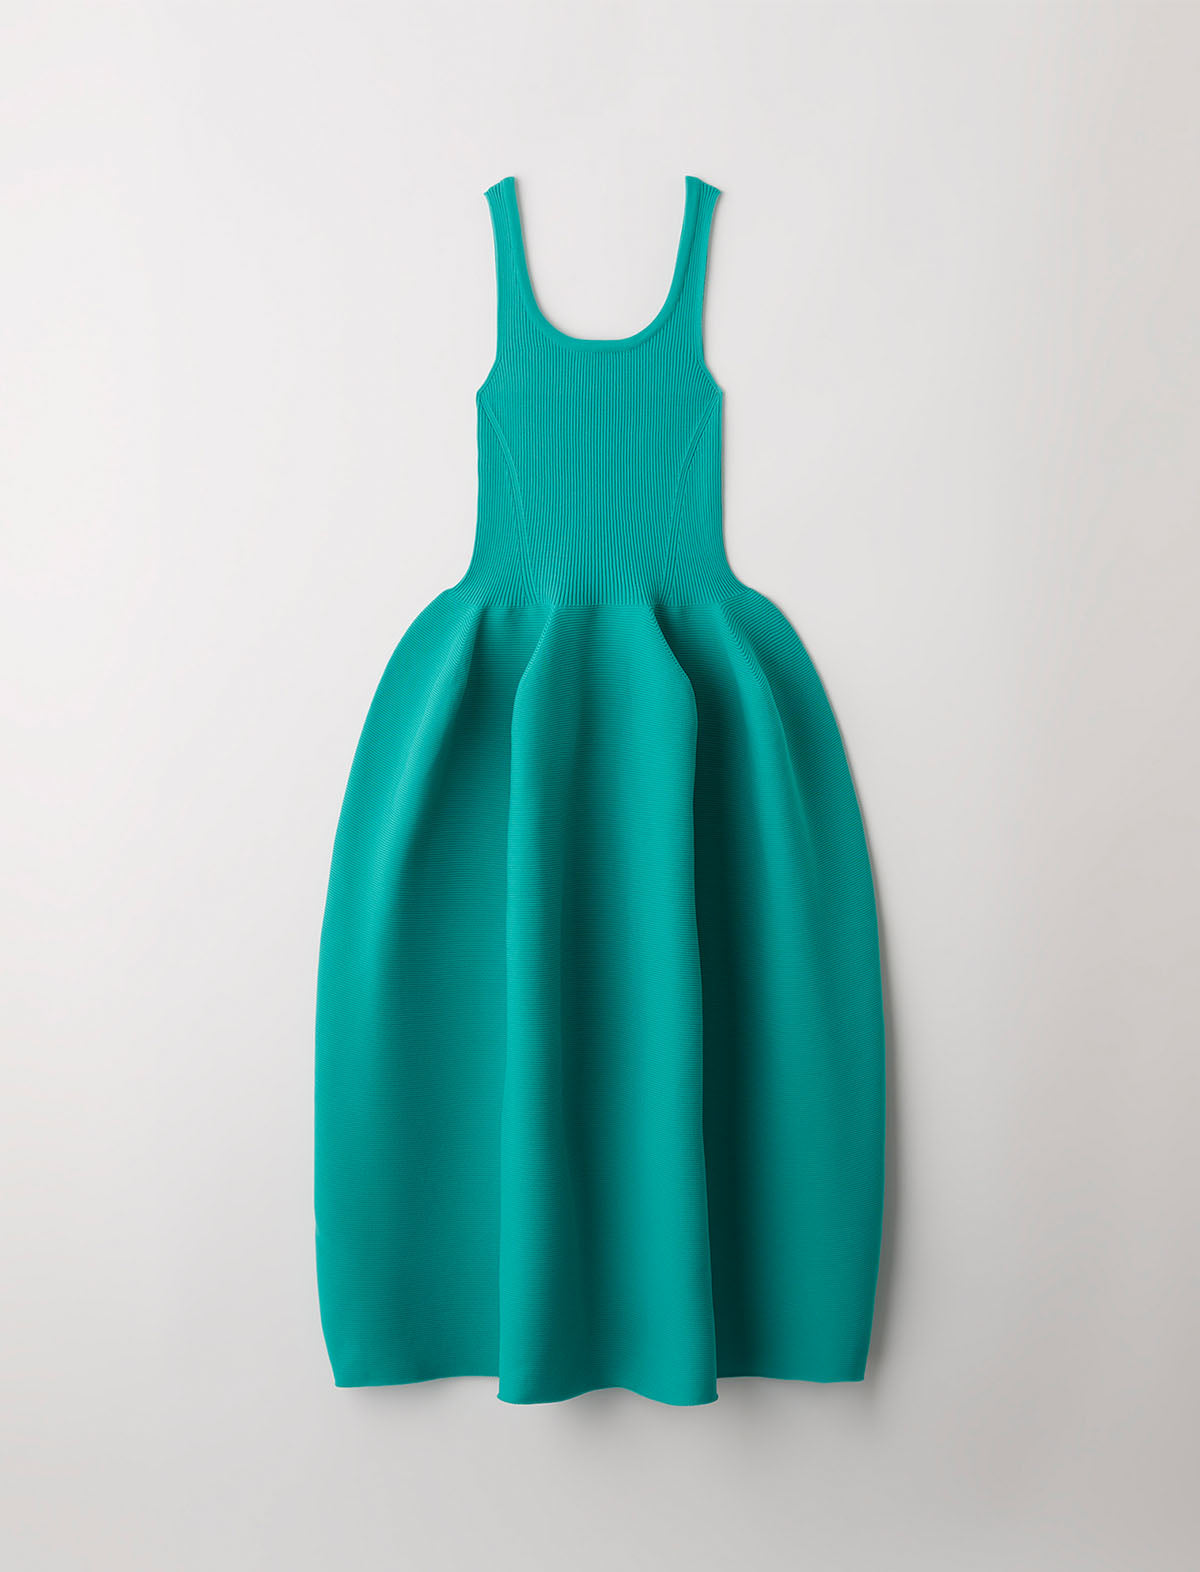 CFCL Pottery Hs Dress 1 in Emerald